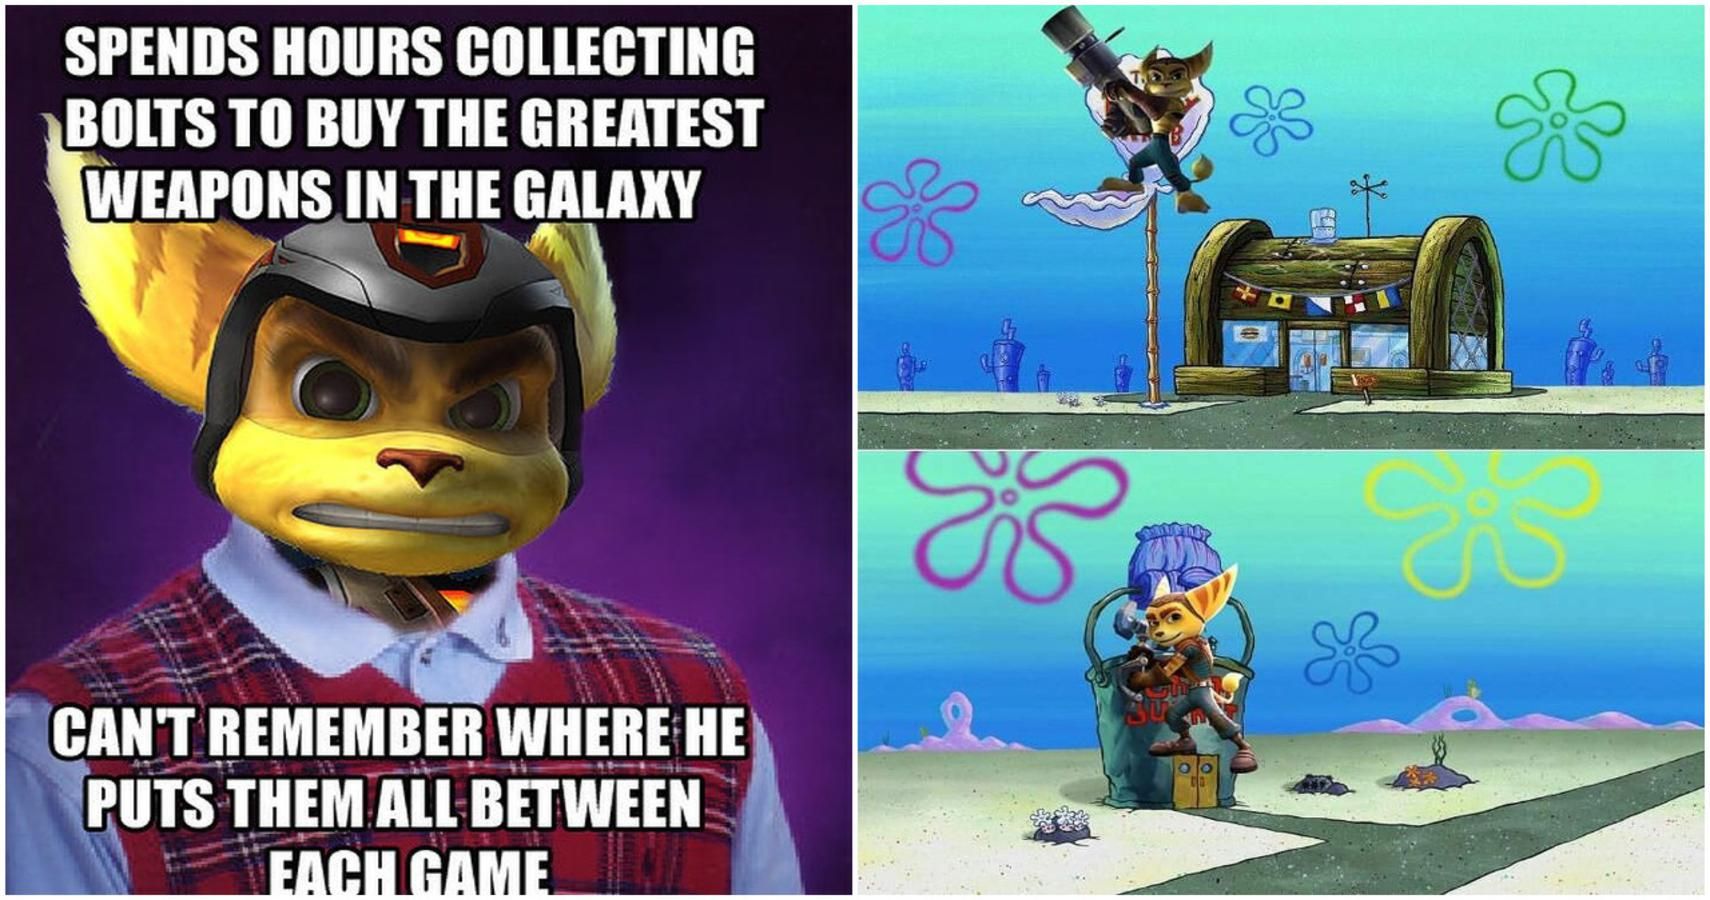 ratchet and clank 2020